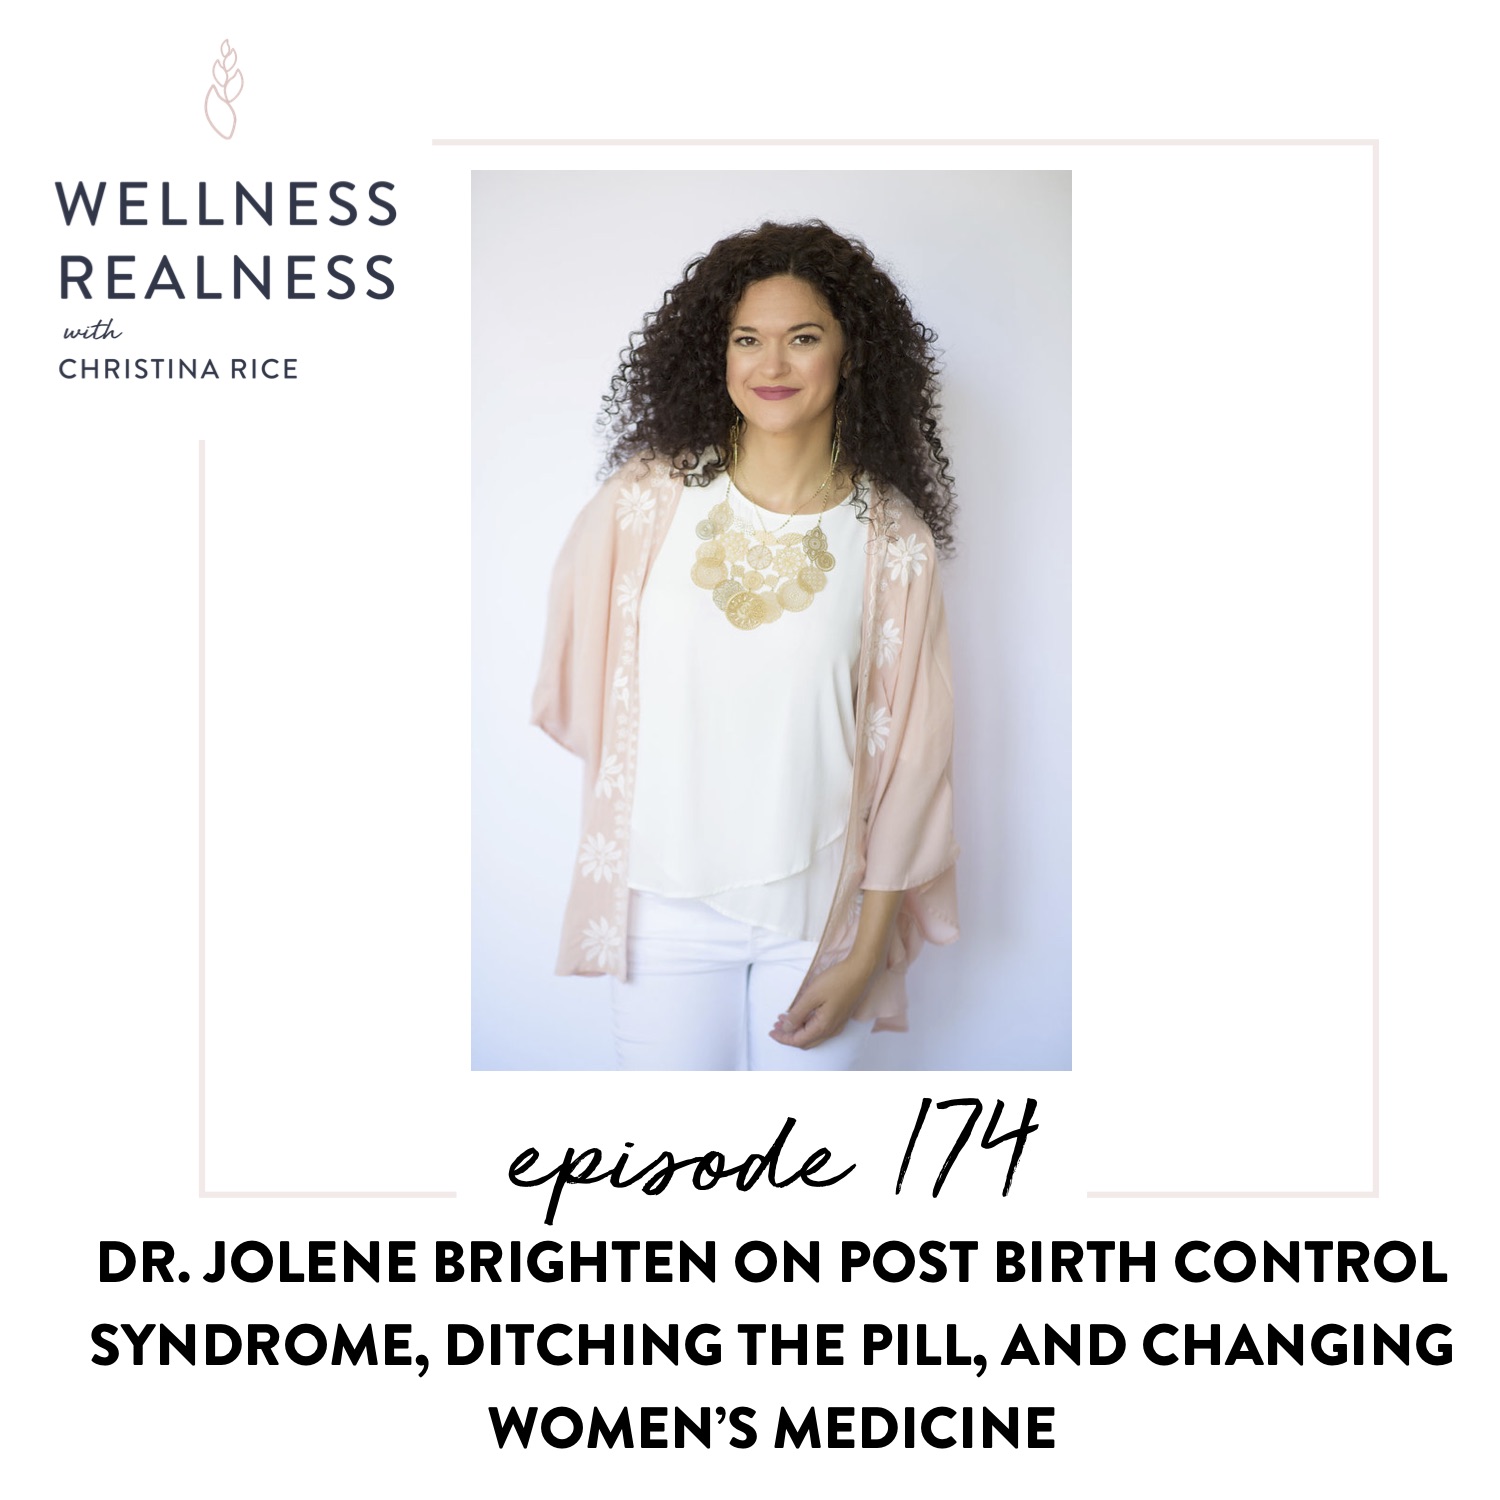 Dr. Jolene Brighten on Post Birth Control Syndrome, Ditching the Pill, and Changing Women’s Medicine